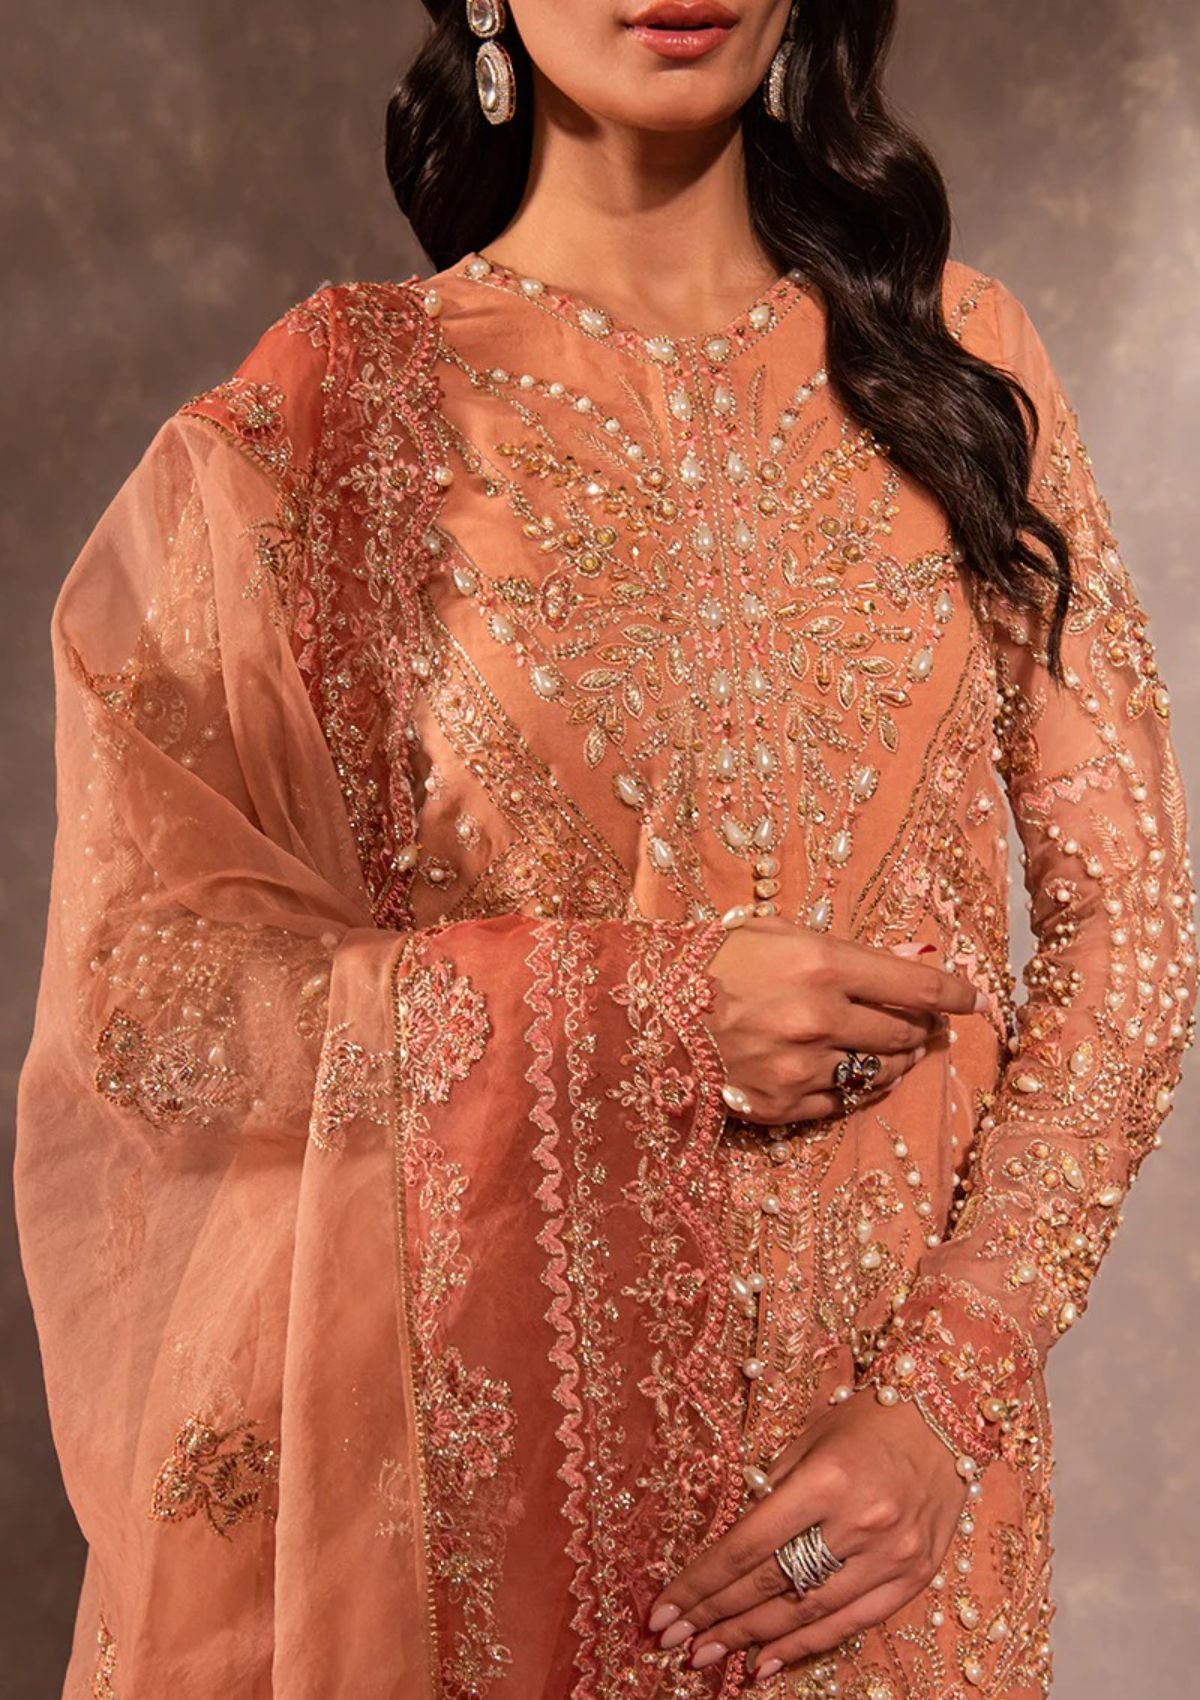 Formal Collection - Maria Osama Khan - Dastaan - DS#02 - Aarzoo